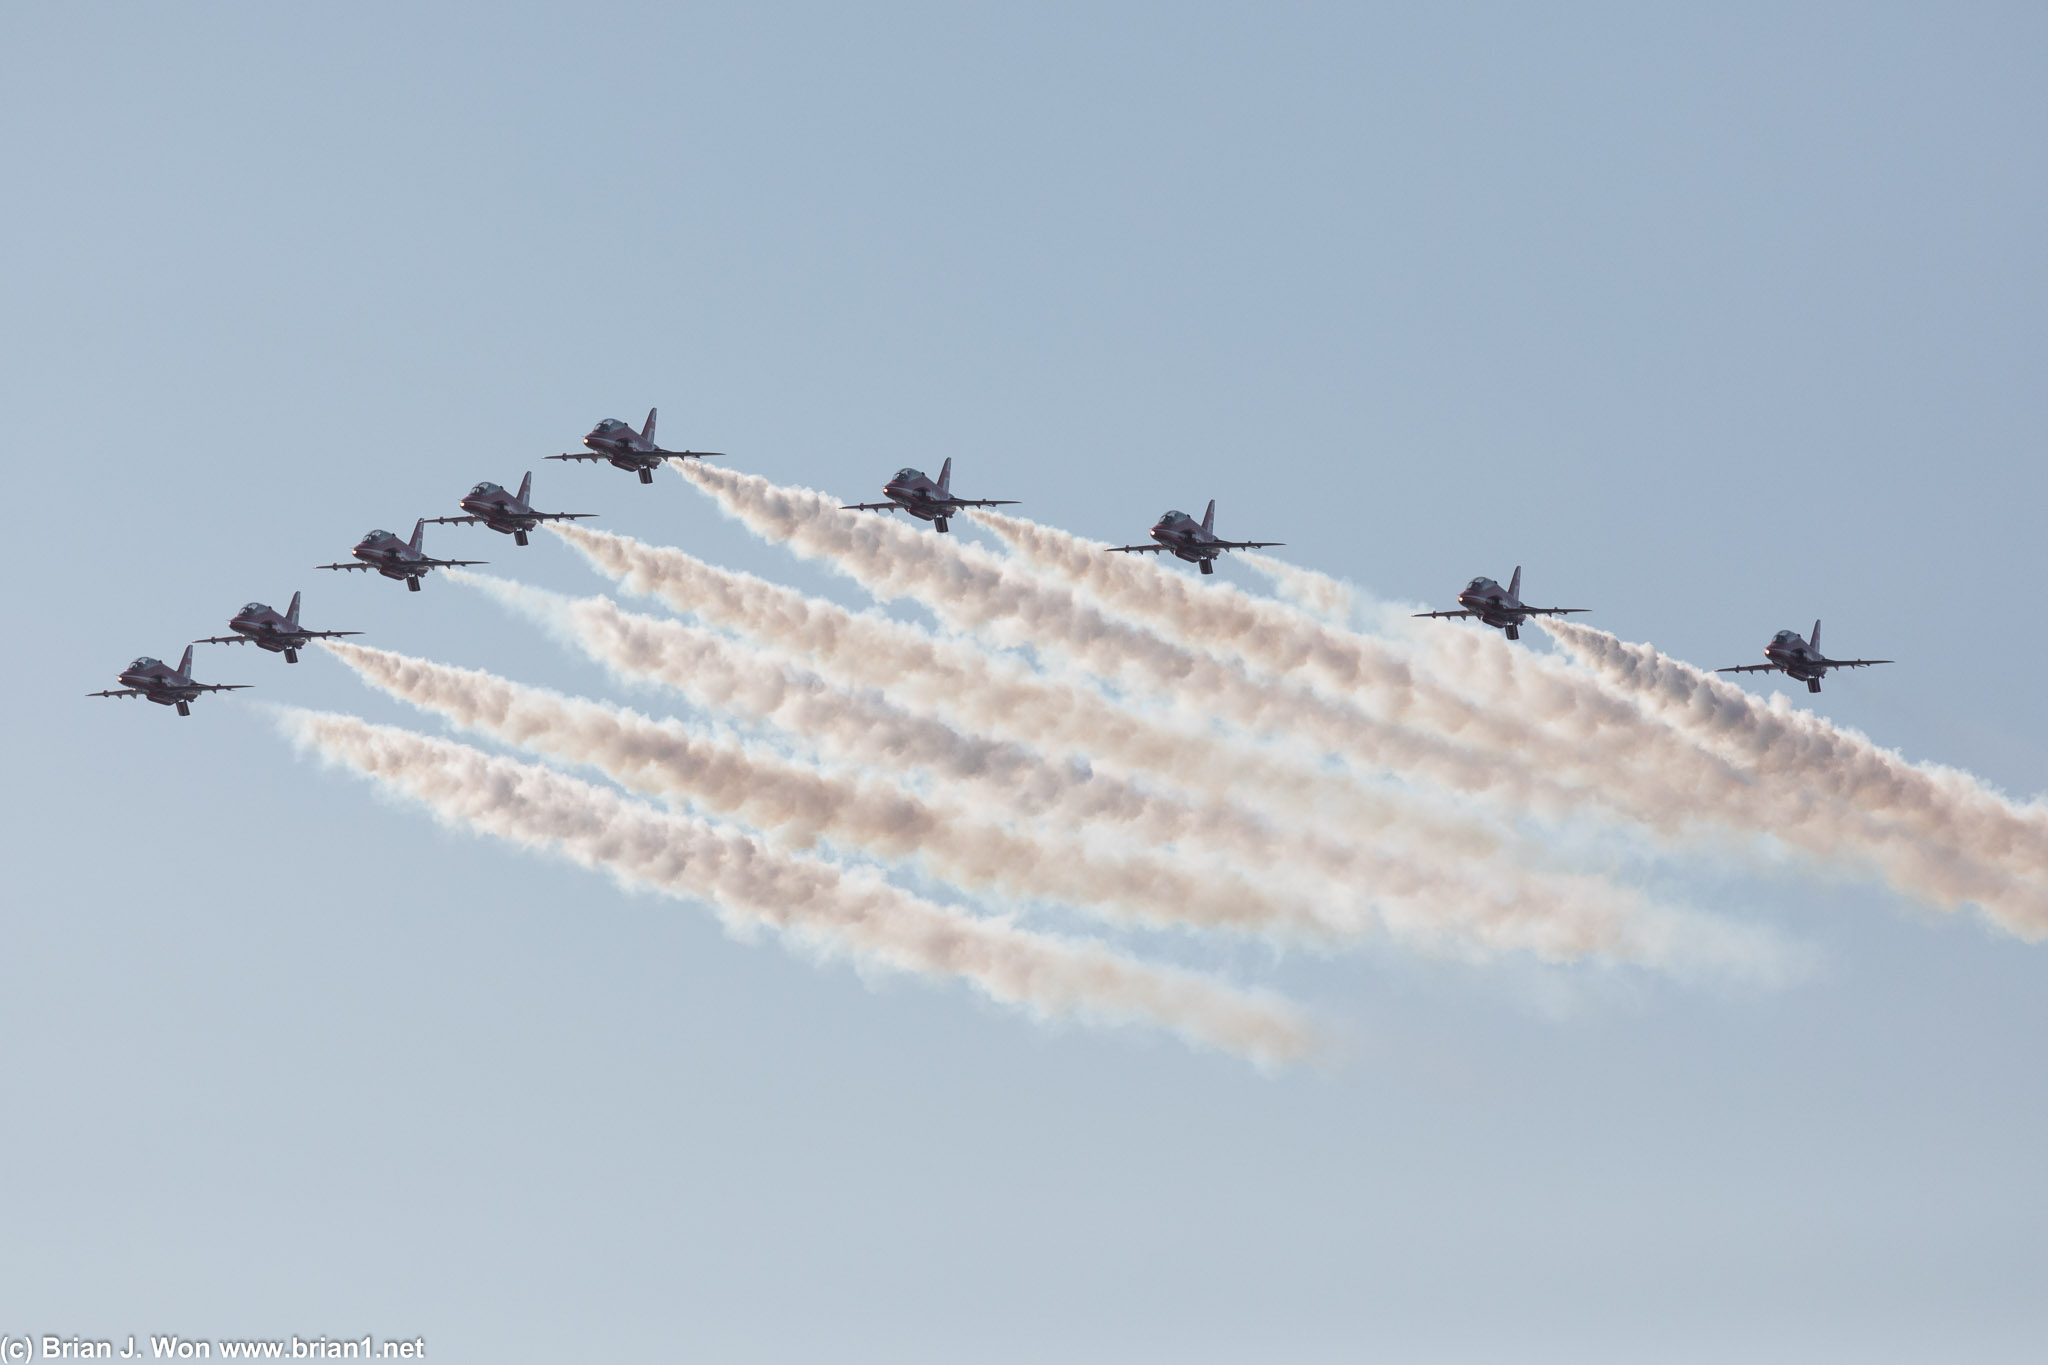 All nine Red Arrows in formation.